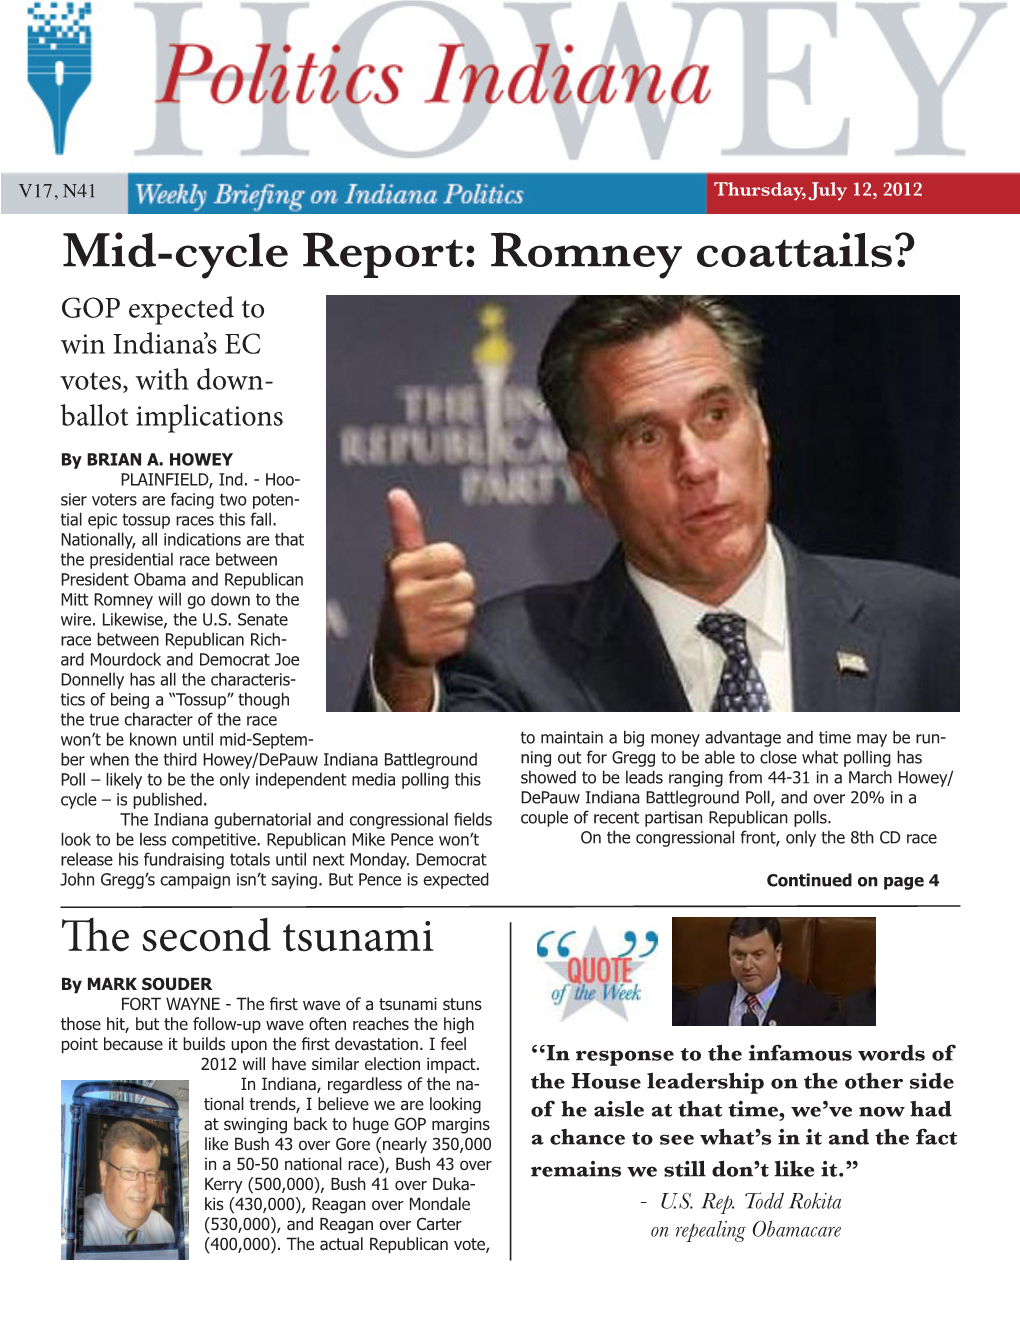 Mid-Cycle Report: Romney Coattails? GOP Expected to Win Indiana’S EC Votes, with Down- Ballot Implications by BRIAN A